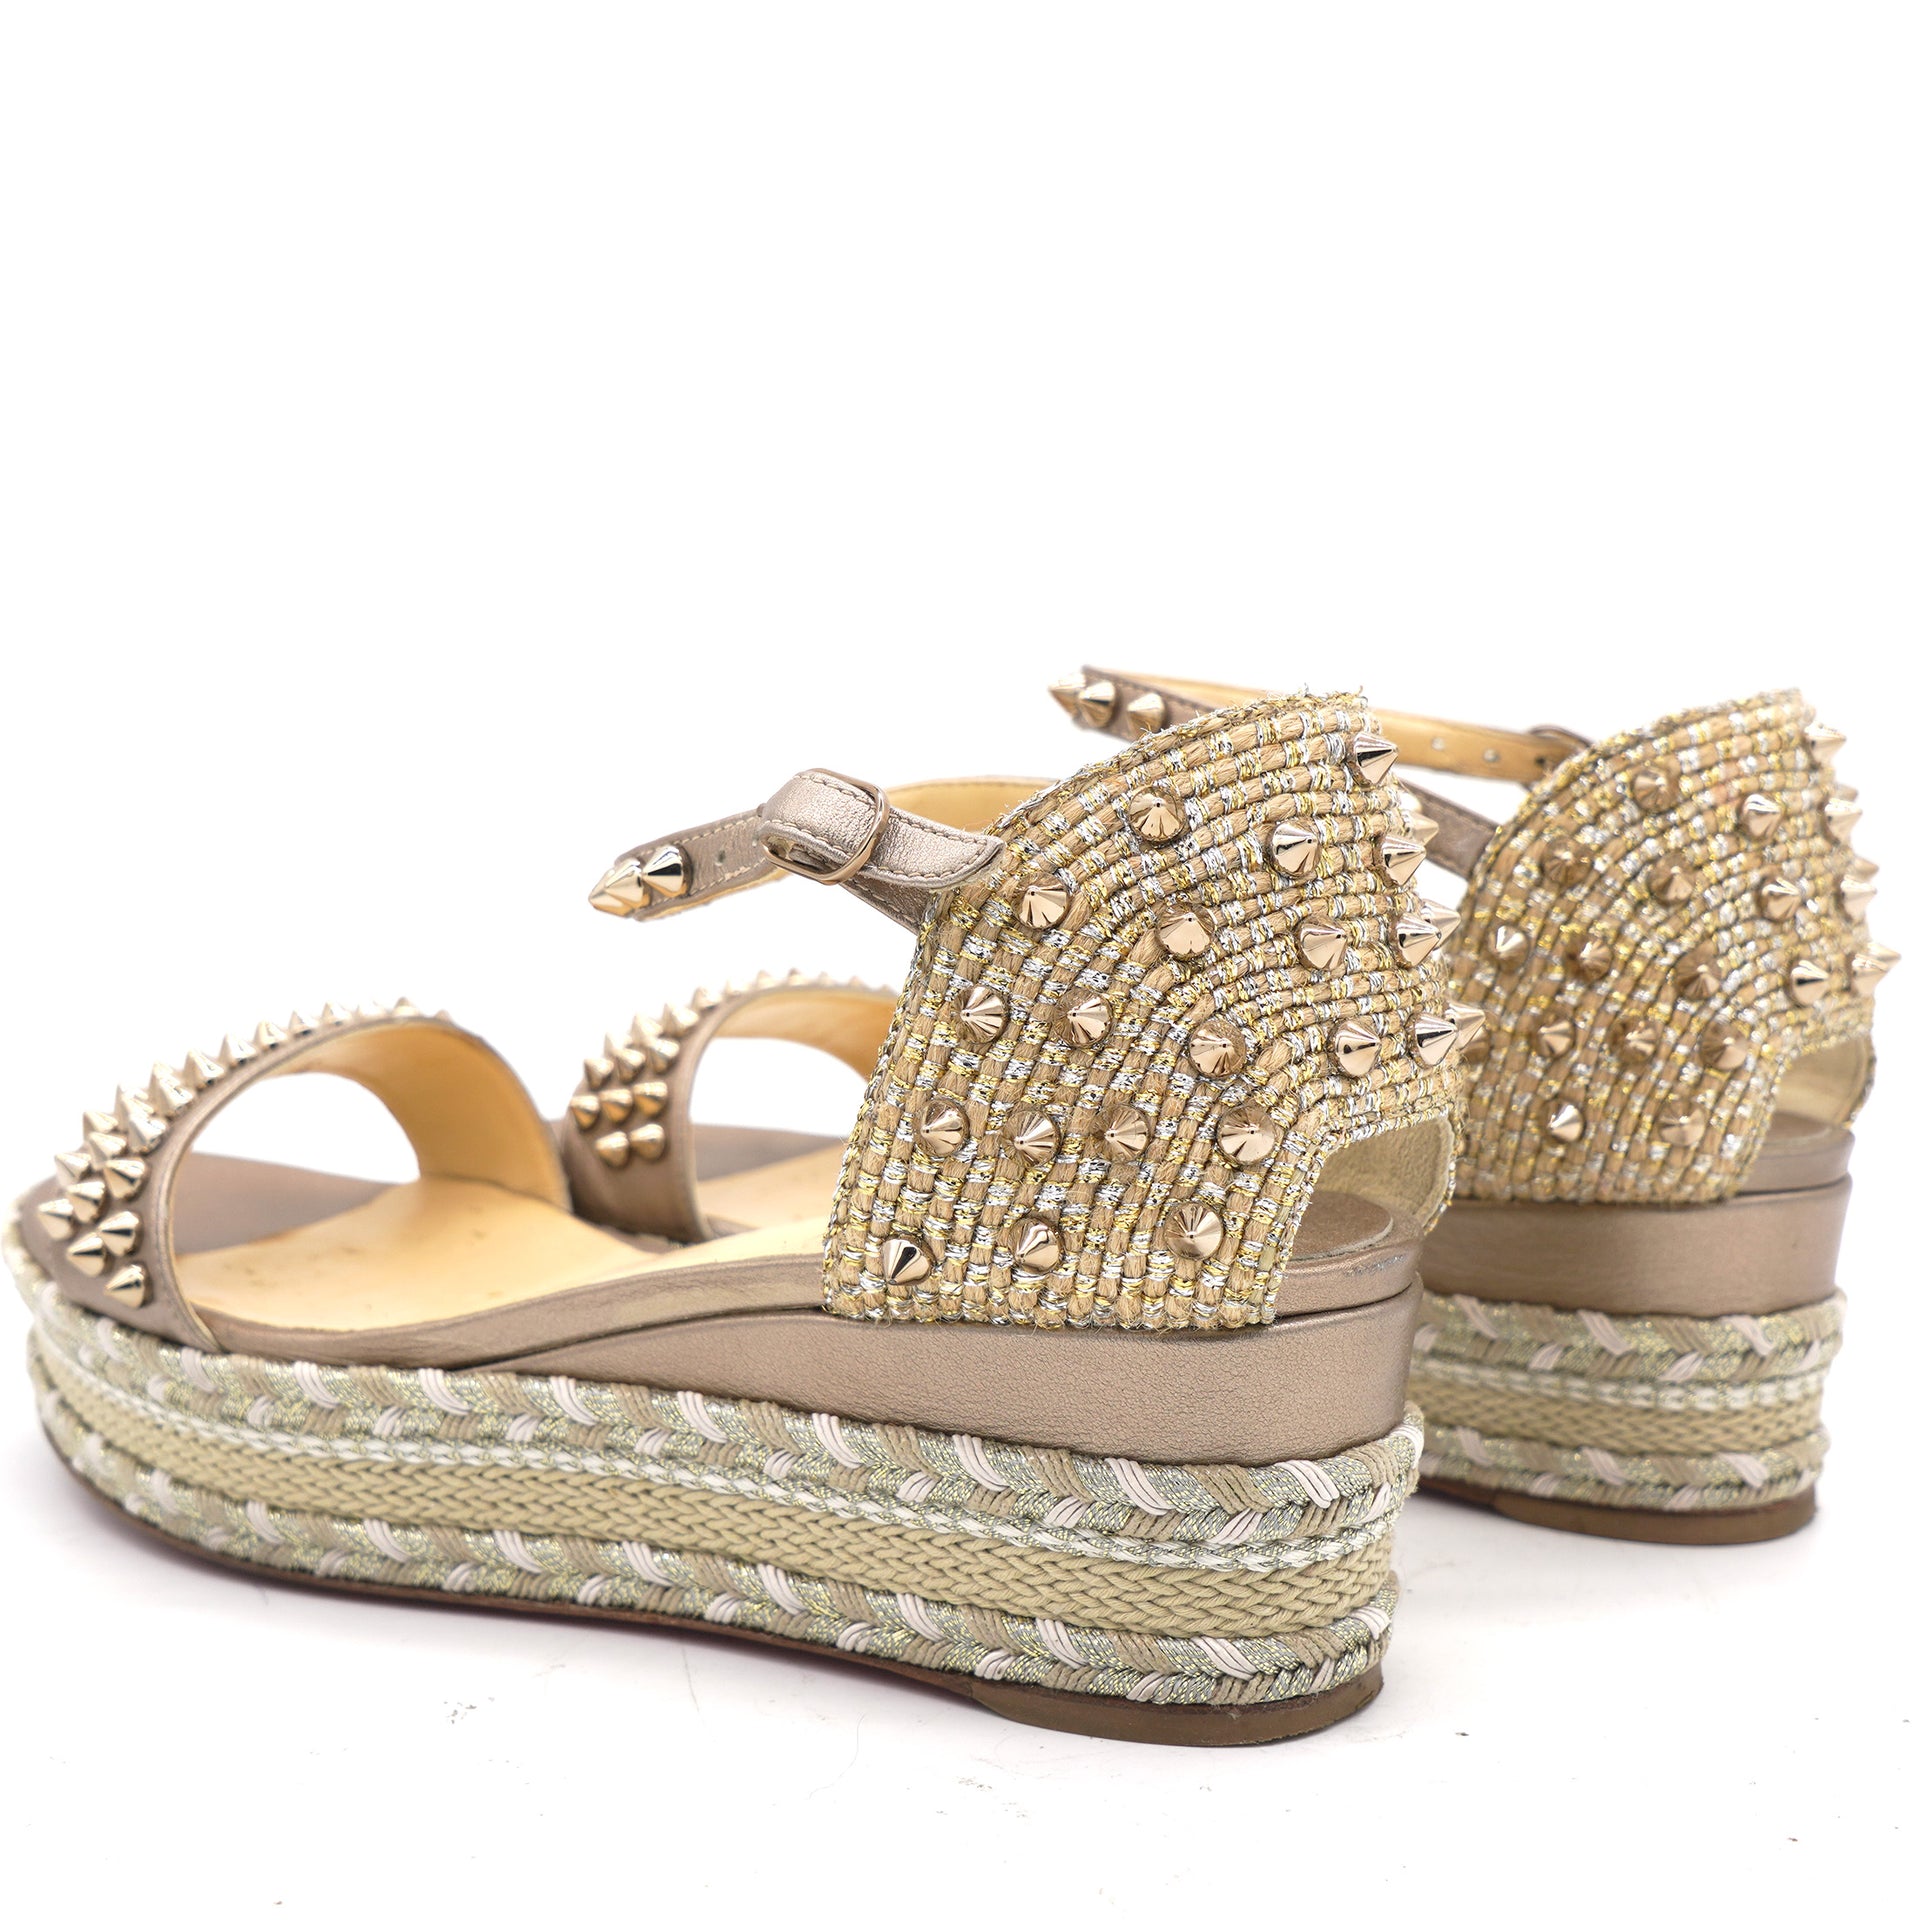 Madmonica 60 studded leather wedge sandals 37